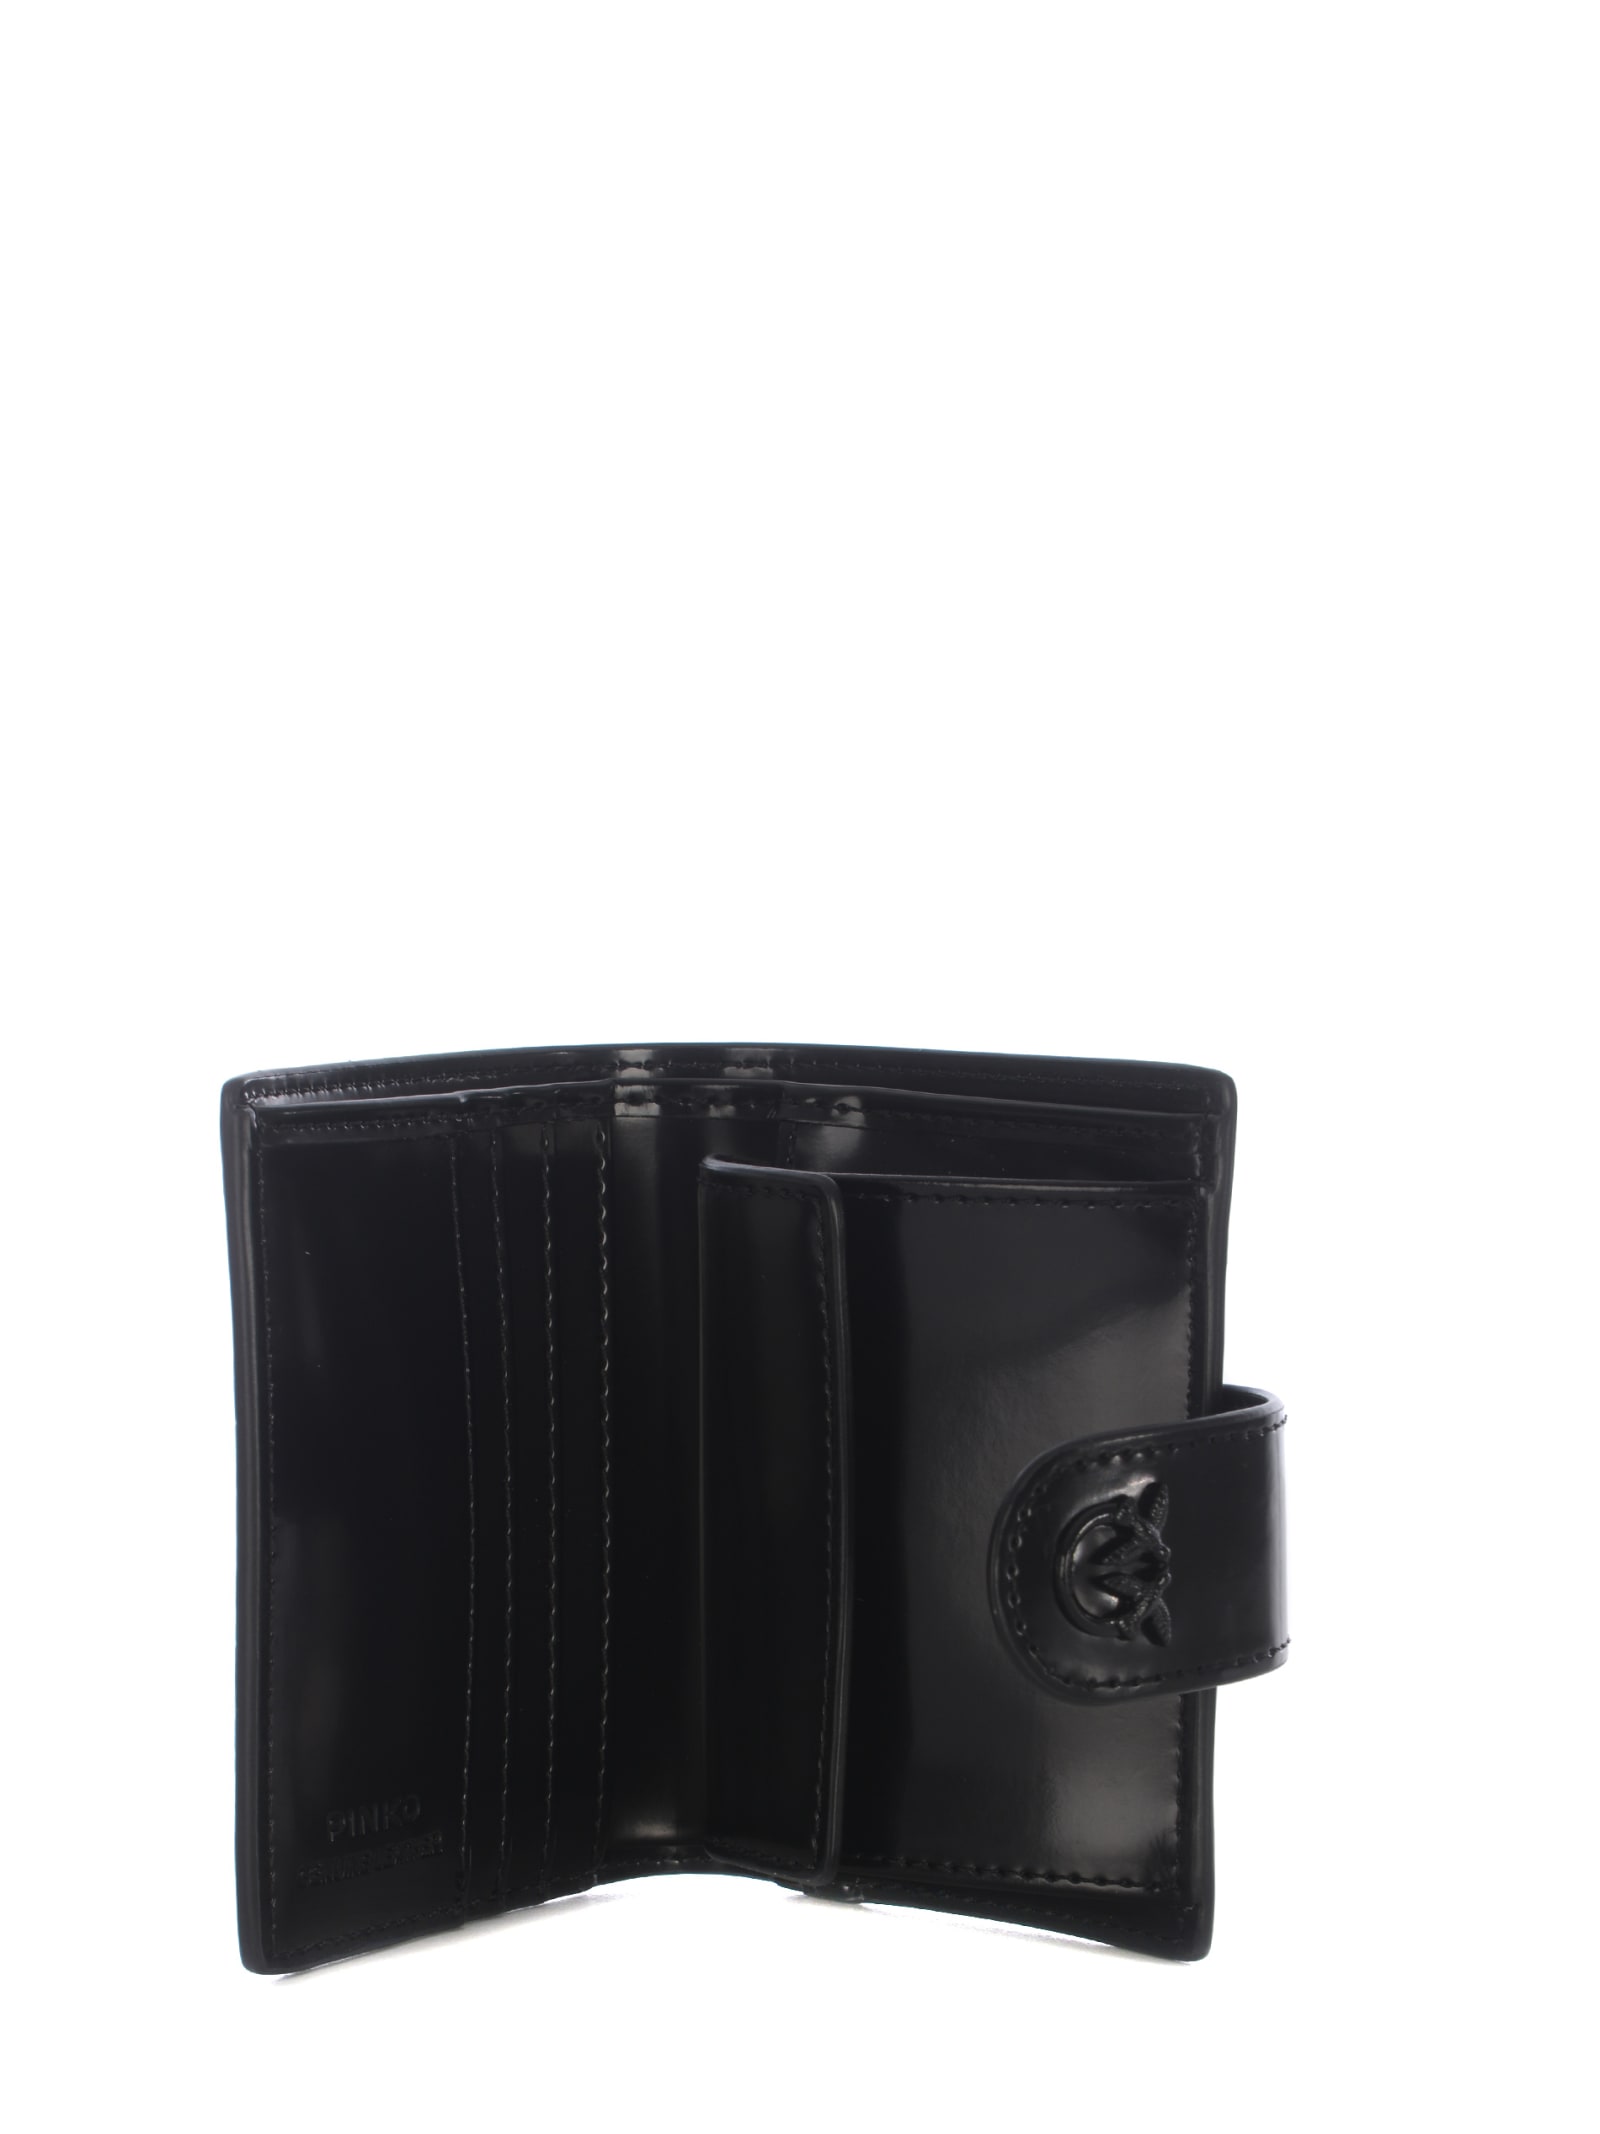 Shop Pinko Wallet  Love Birds Made Of Leather In Nero Lucido